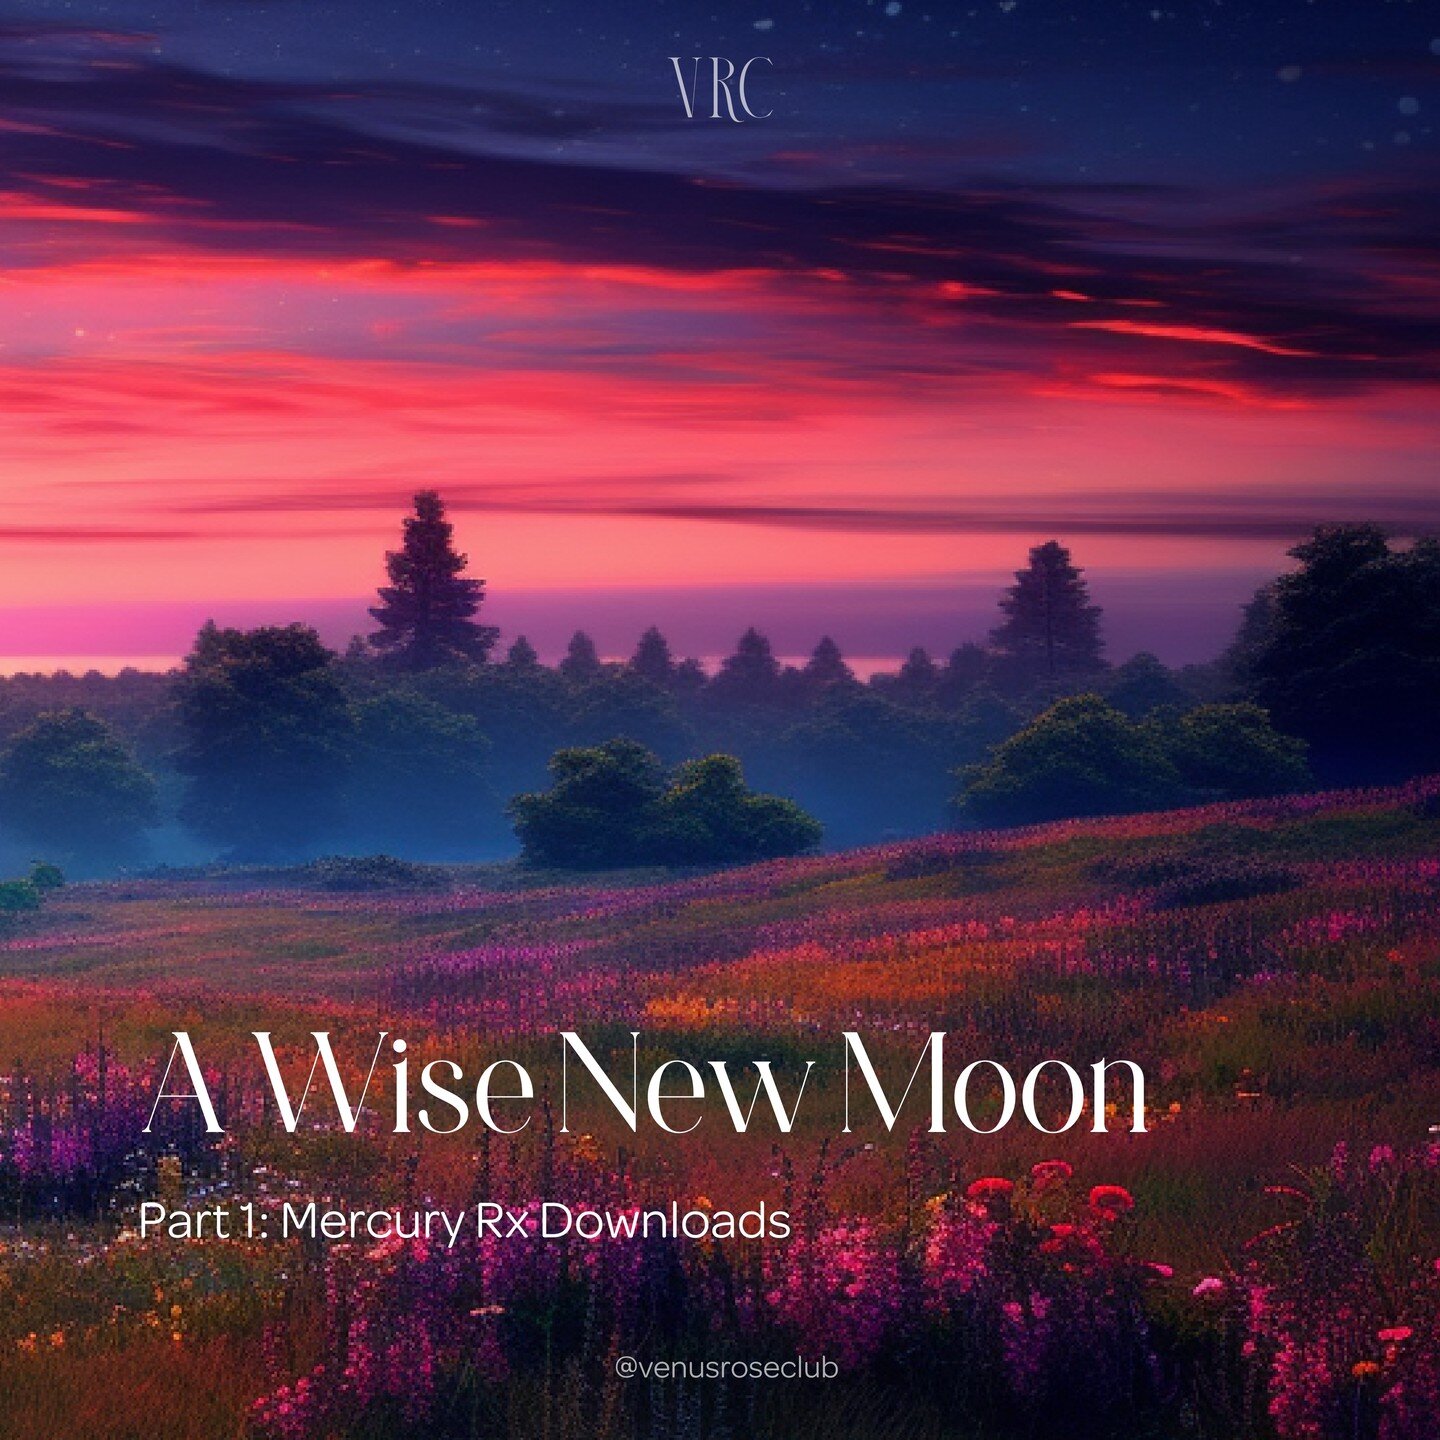 🌑 A Wise New Moon - Part 1

This is a long one! So grab something tasty, maybe even your journal, and spend some time with the insights from Mercury's Retrograde in Taurus.

I believe this is beautiful prep for the upcoming abundance New Moon in Tau